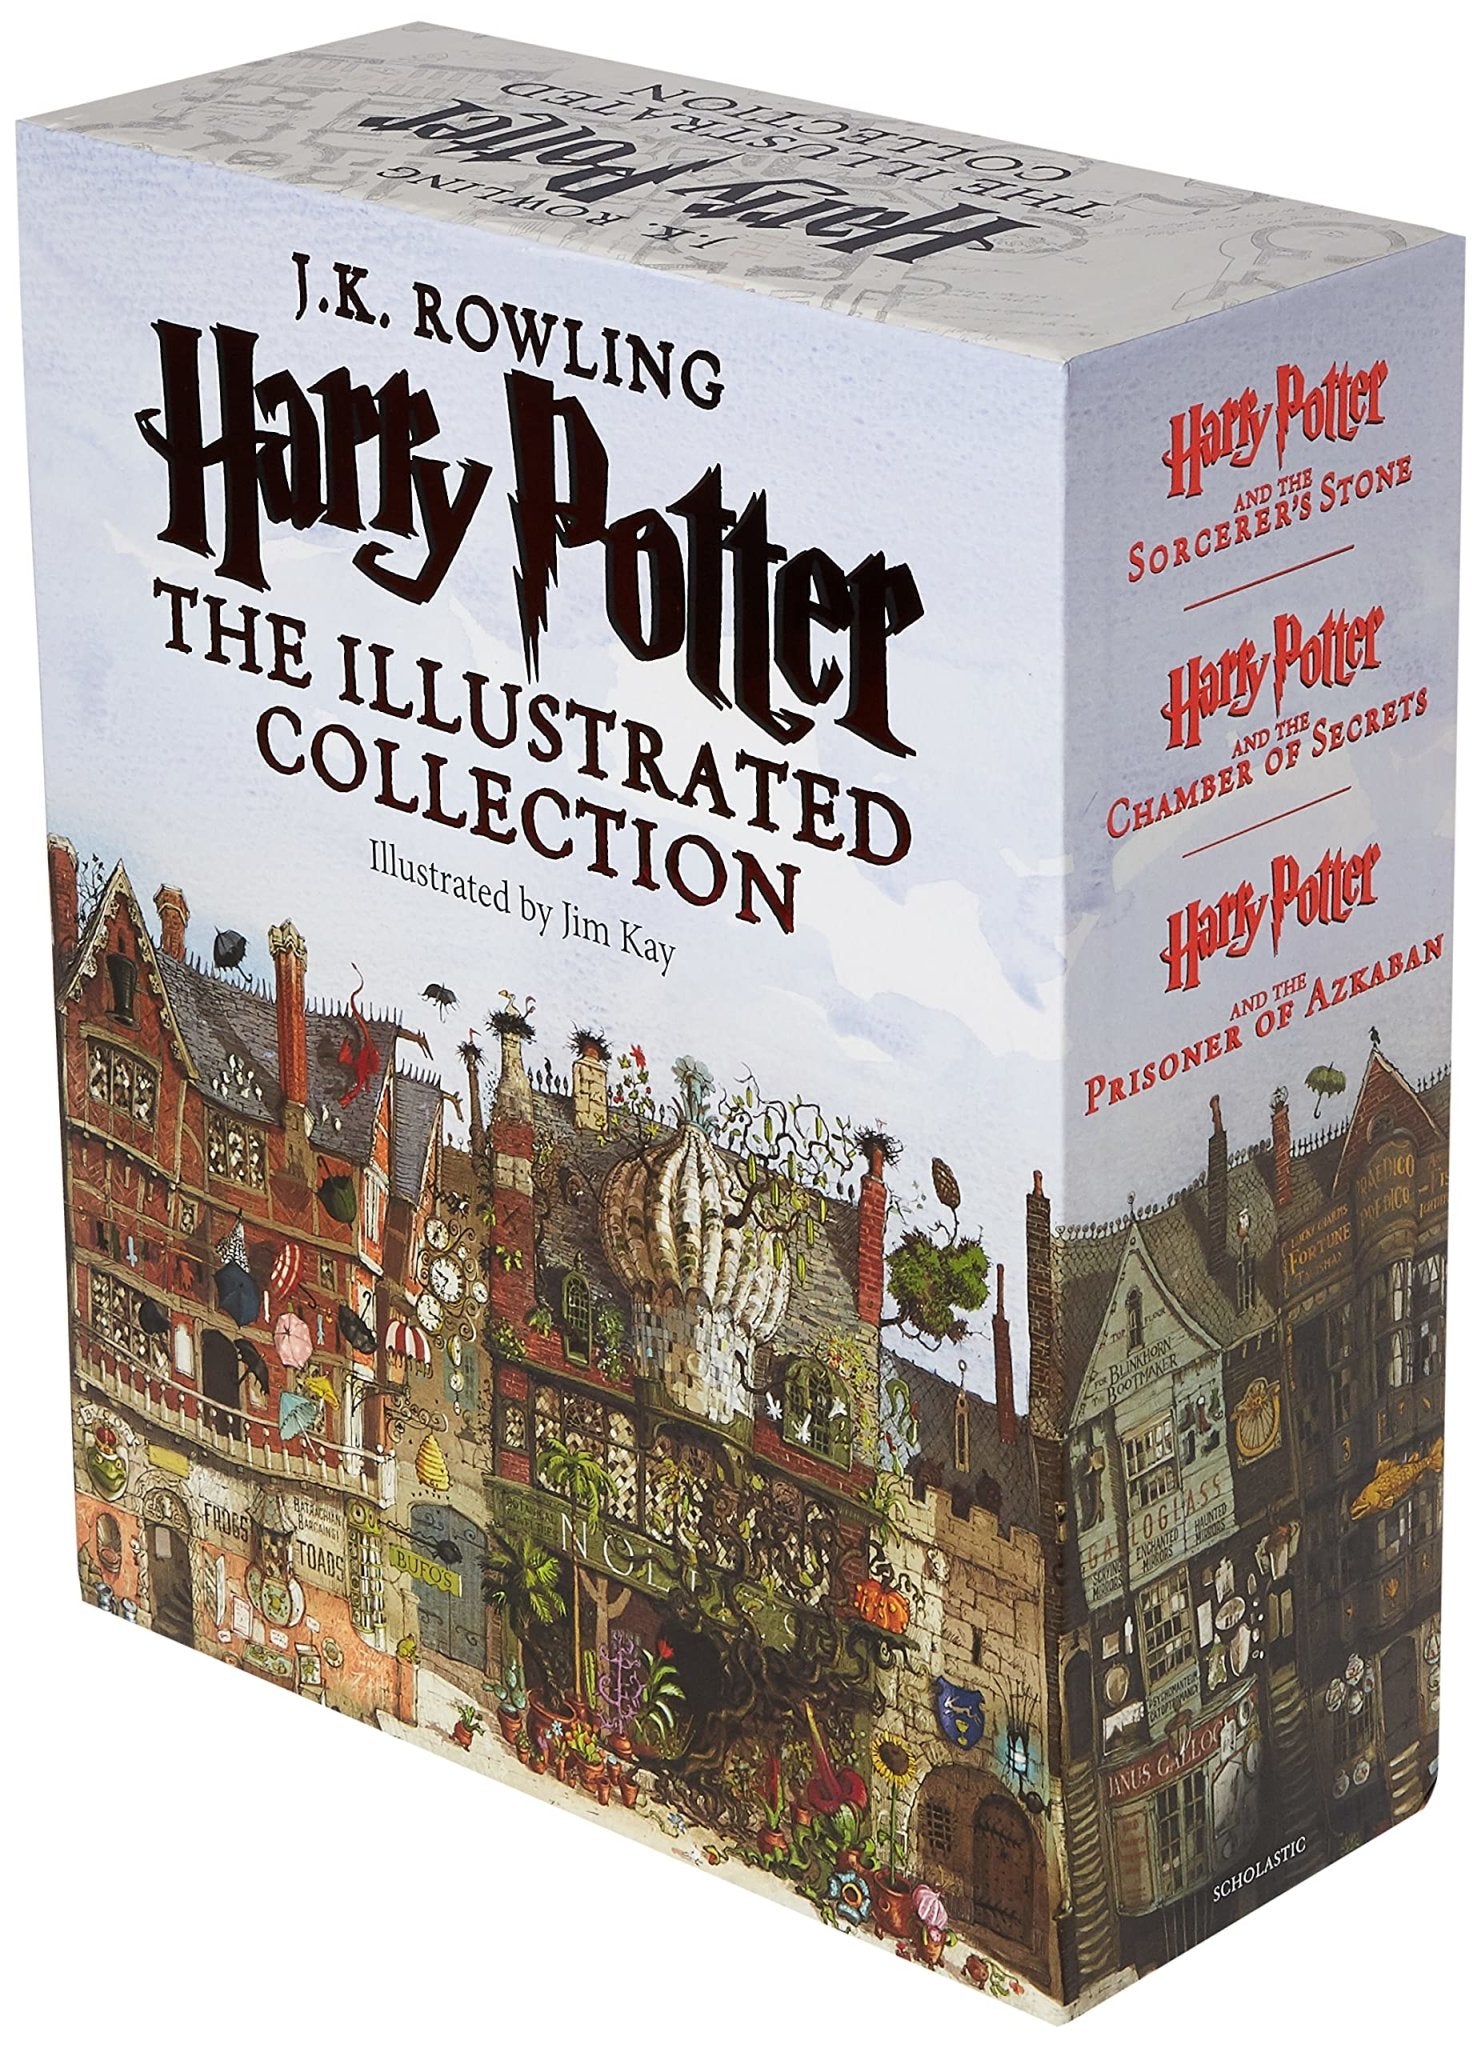 Harry Potter: The Illustrated Collection (Books 1-3 Boxed Set) by J.K. Rowling - Boxed Set - LV'S Global Media